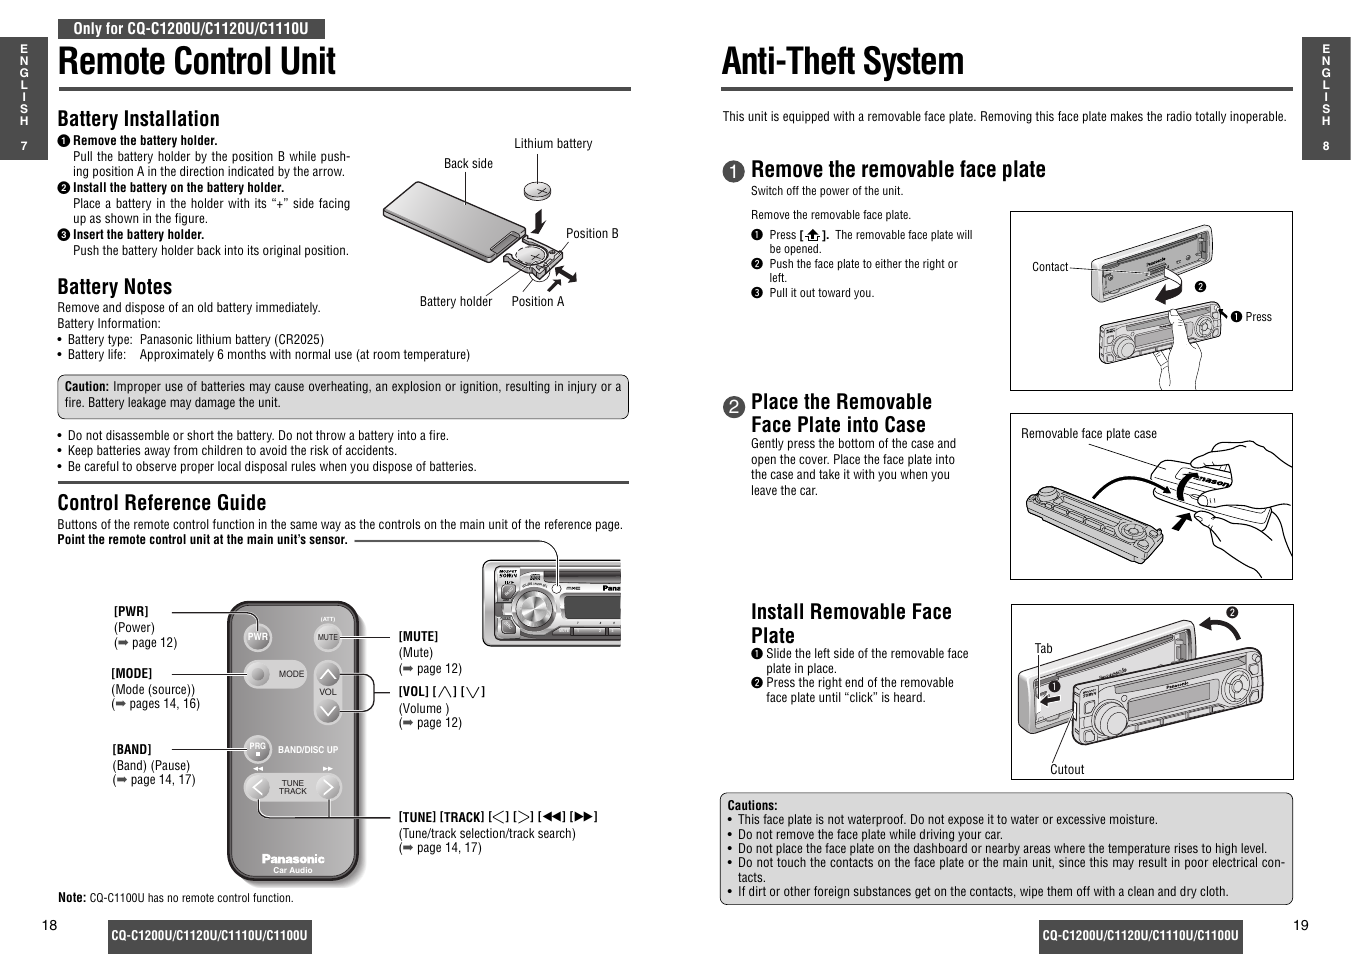 Remote control unit, Anti-theft system, Remove the removable face plate | Install removable face plate, Place the removable face plate into case, Power, Battery installation, Control reference guide | Panasonic CQ-C1200U Manuel d'utilisation | Page 10 / 17